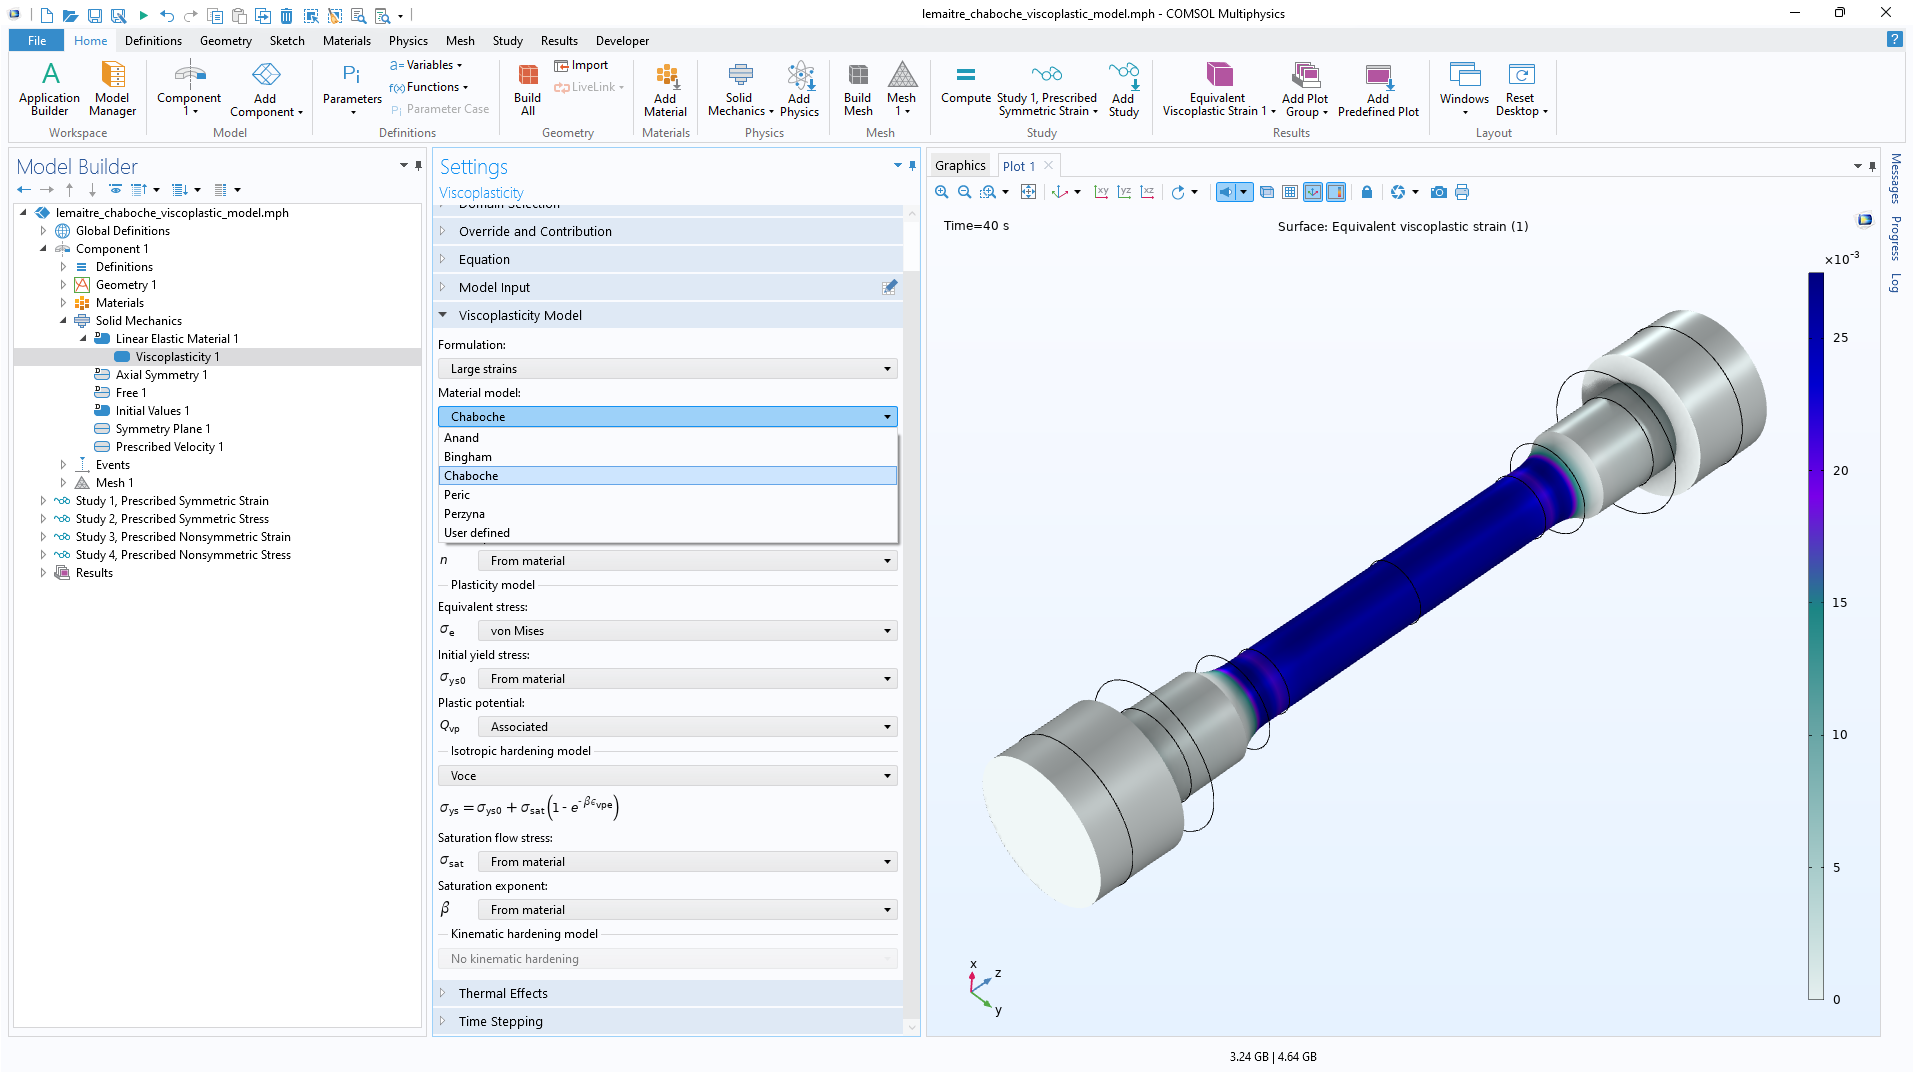 The COMSOL Multiphysics UI showing the Model Builder with the Viscoplasticity node highlighted, the corresponding Settings window, and a viscoplastic model in the Graphics window.